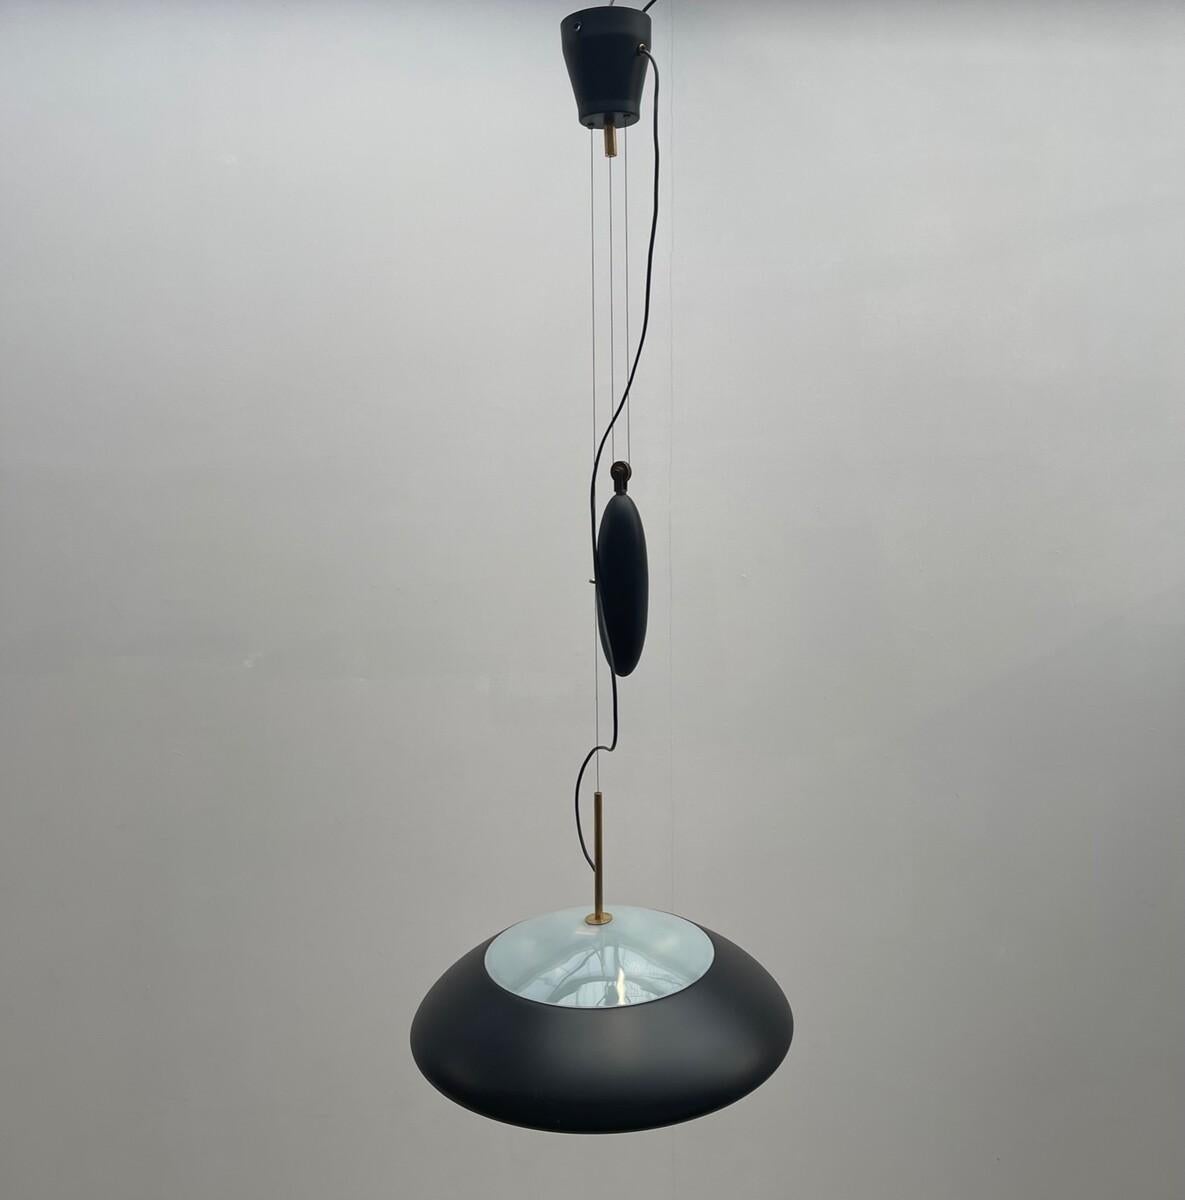 Mid-Century Modern suspension with counterweight by Oscar Torlasco, Italy, 1950s.